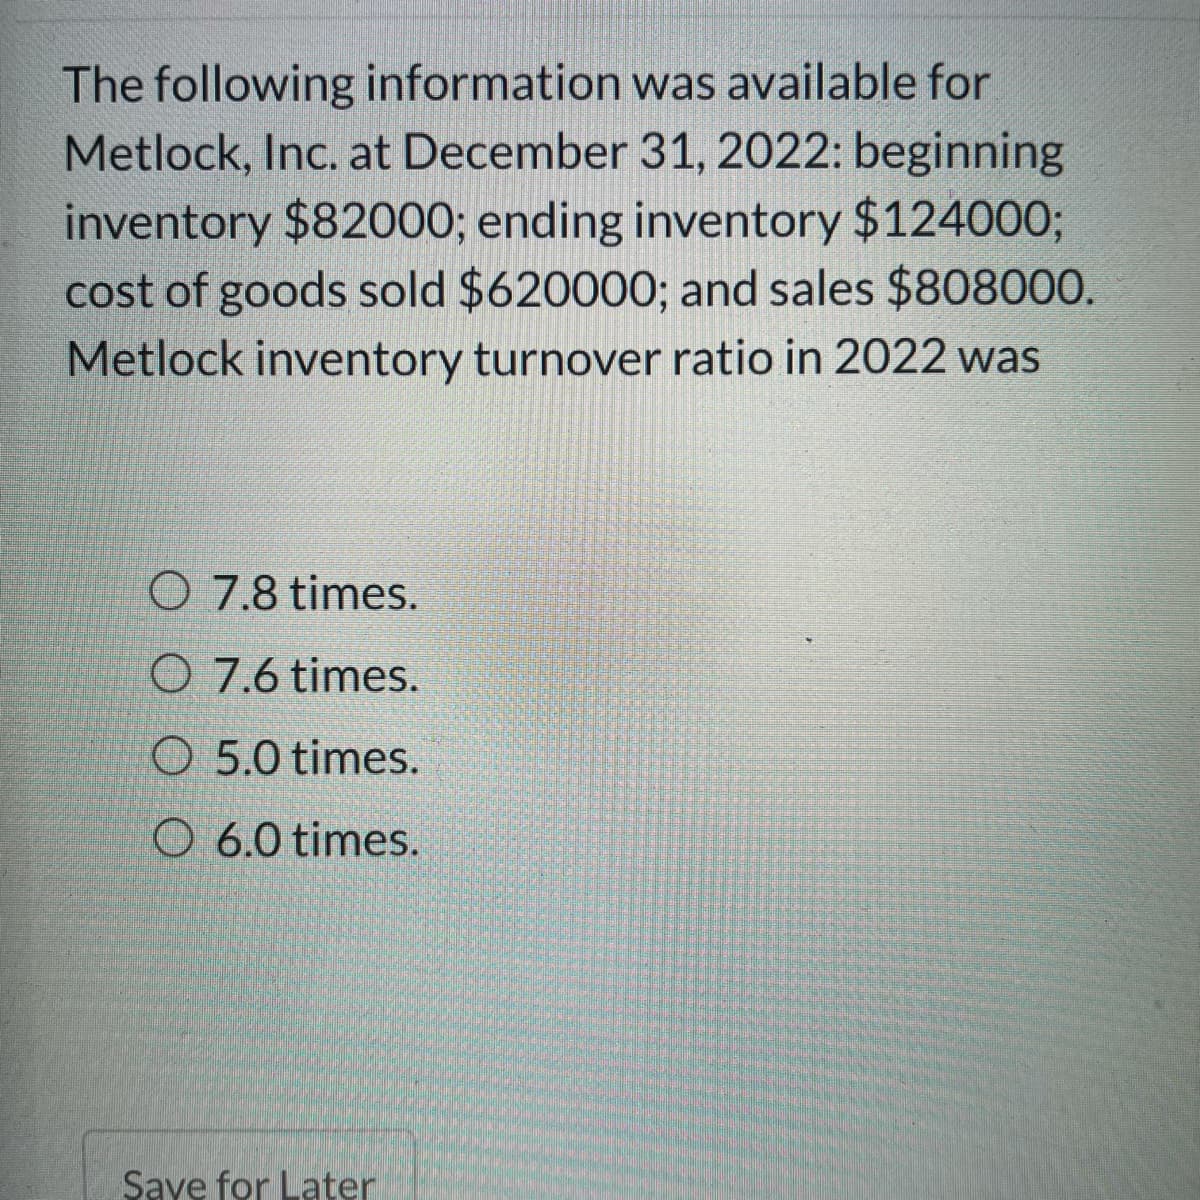 The following information was available for
Metlock, Inc. at December 31, 2022: beginning
inventory $82000; ending inventory $124000%3;
cost of goods sold $620000; and sales $808000.
Metlock inventory turnover ratio in 2022 was
O 7.8 times.
O 7.6 times.
O 5.0 times.
O 6.0 times.
Saye for Later
